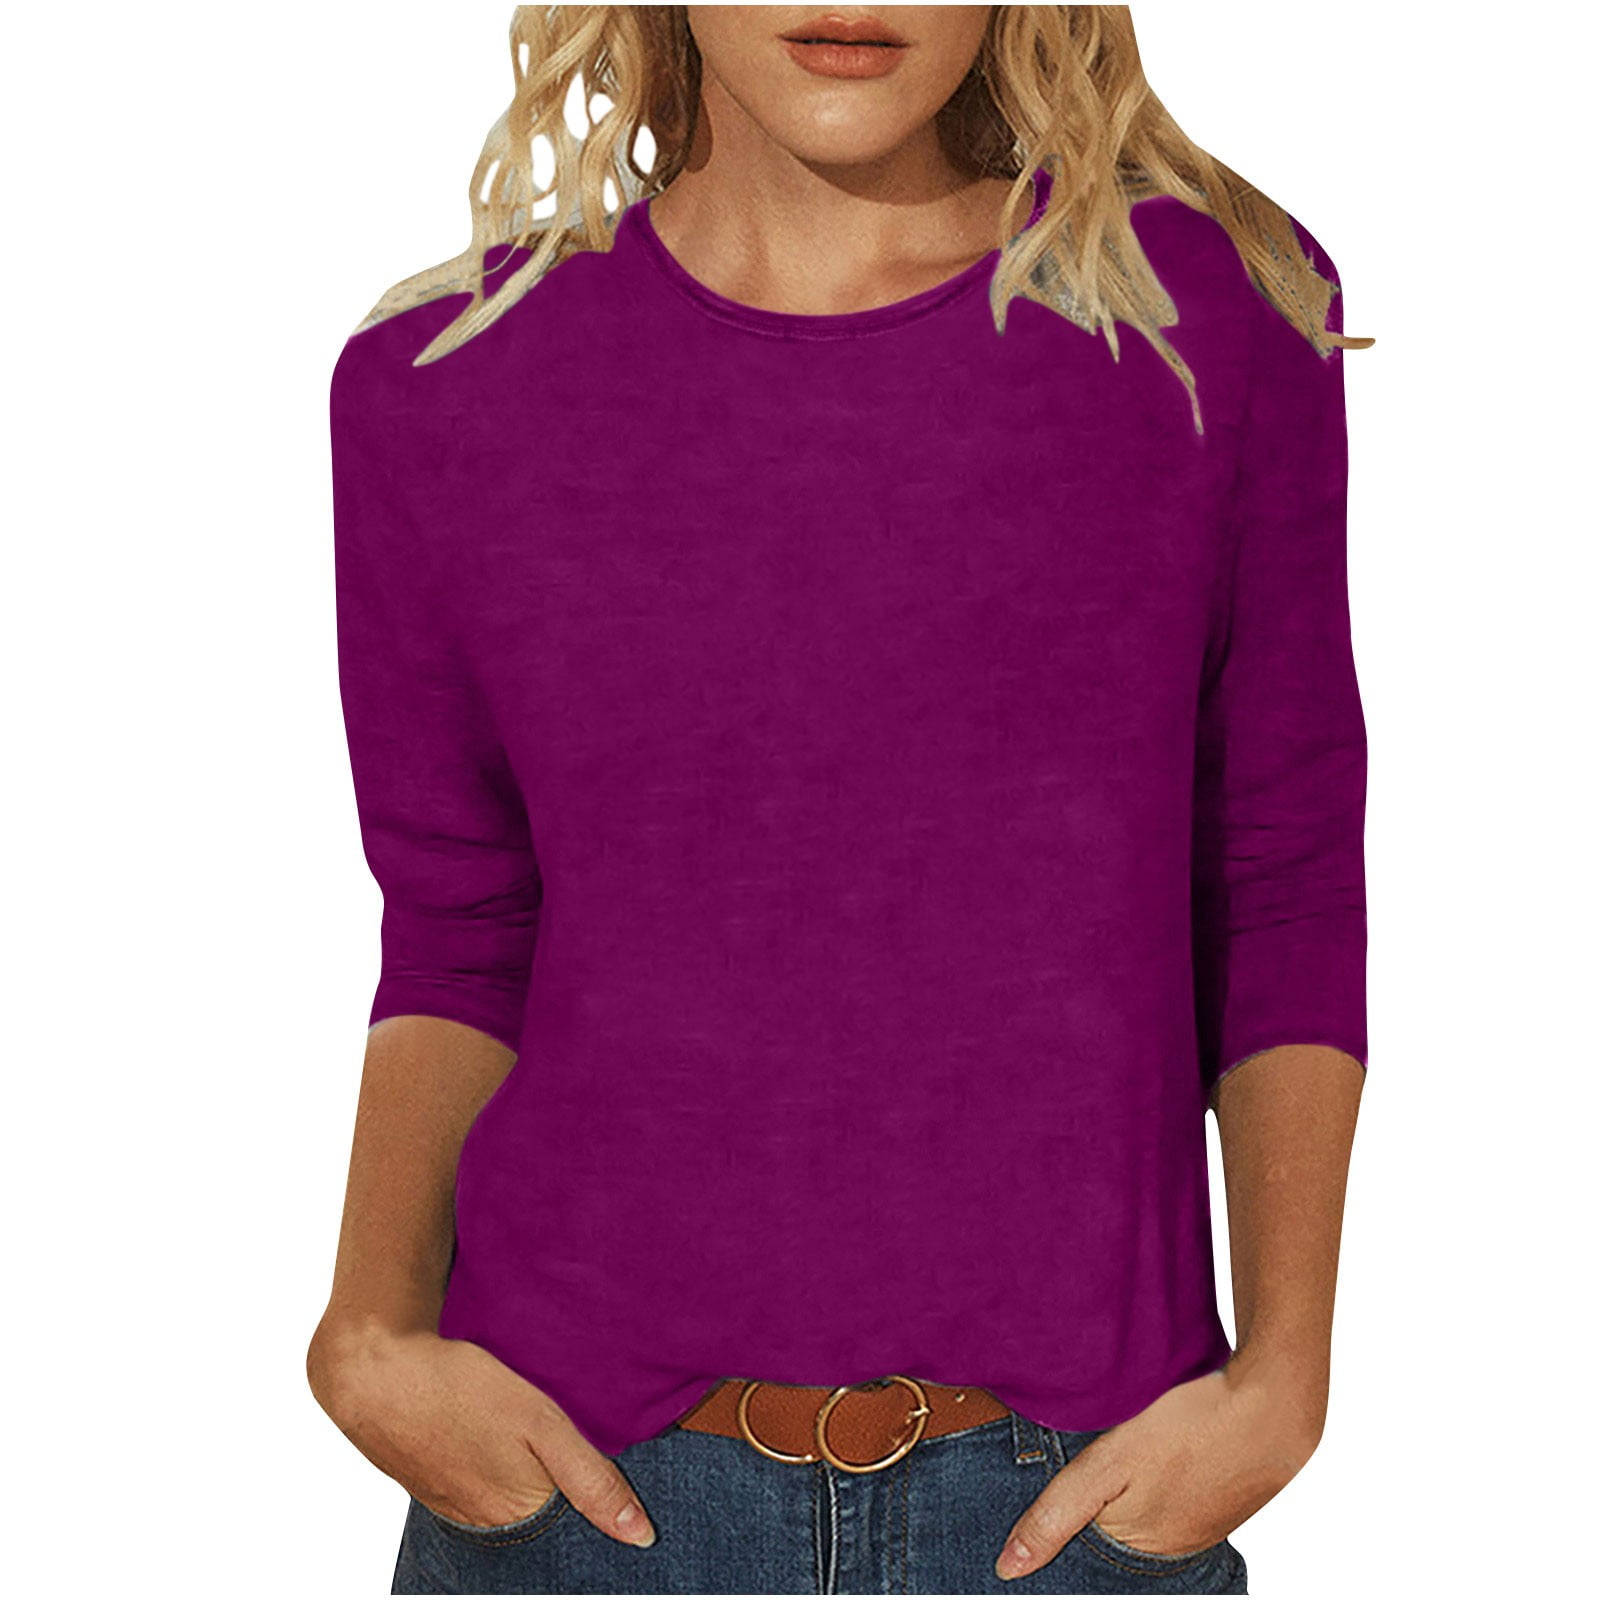 Ustyle Long Sleeve Undershirt Breathable Plain Pullover Ladies Winter  Clothing T-Shirt Top Elastic Casual Style Underwear Female Purple 